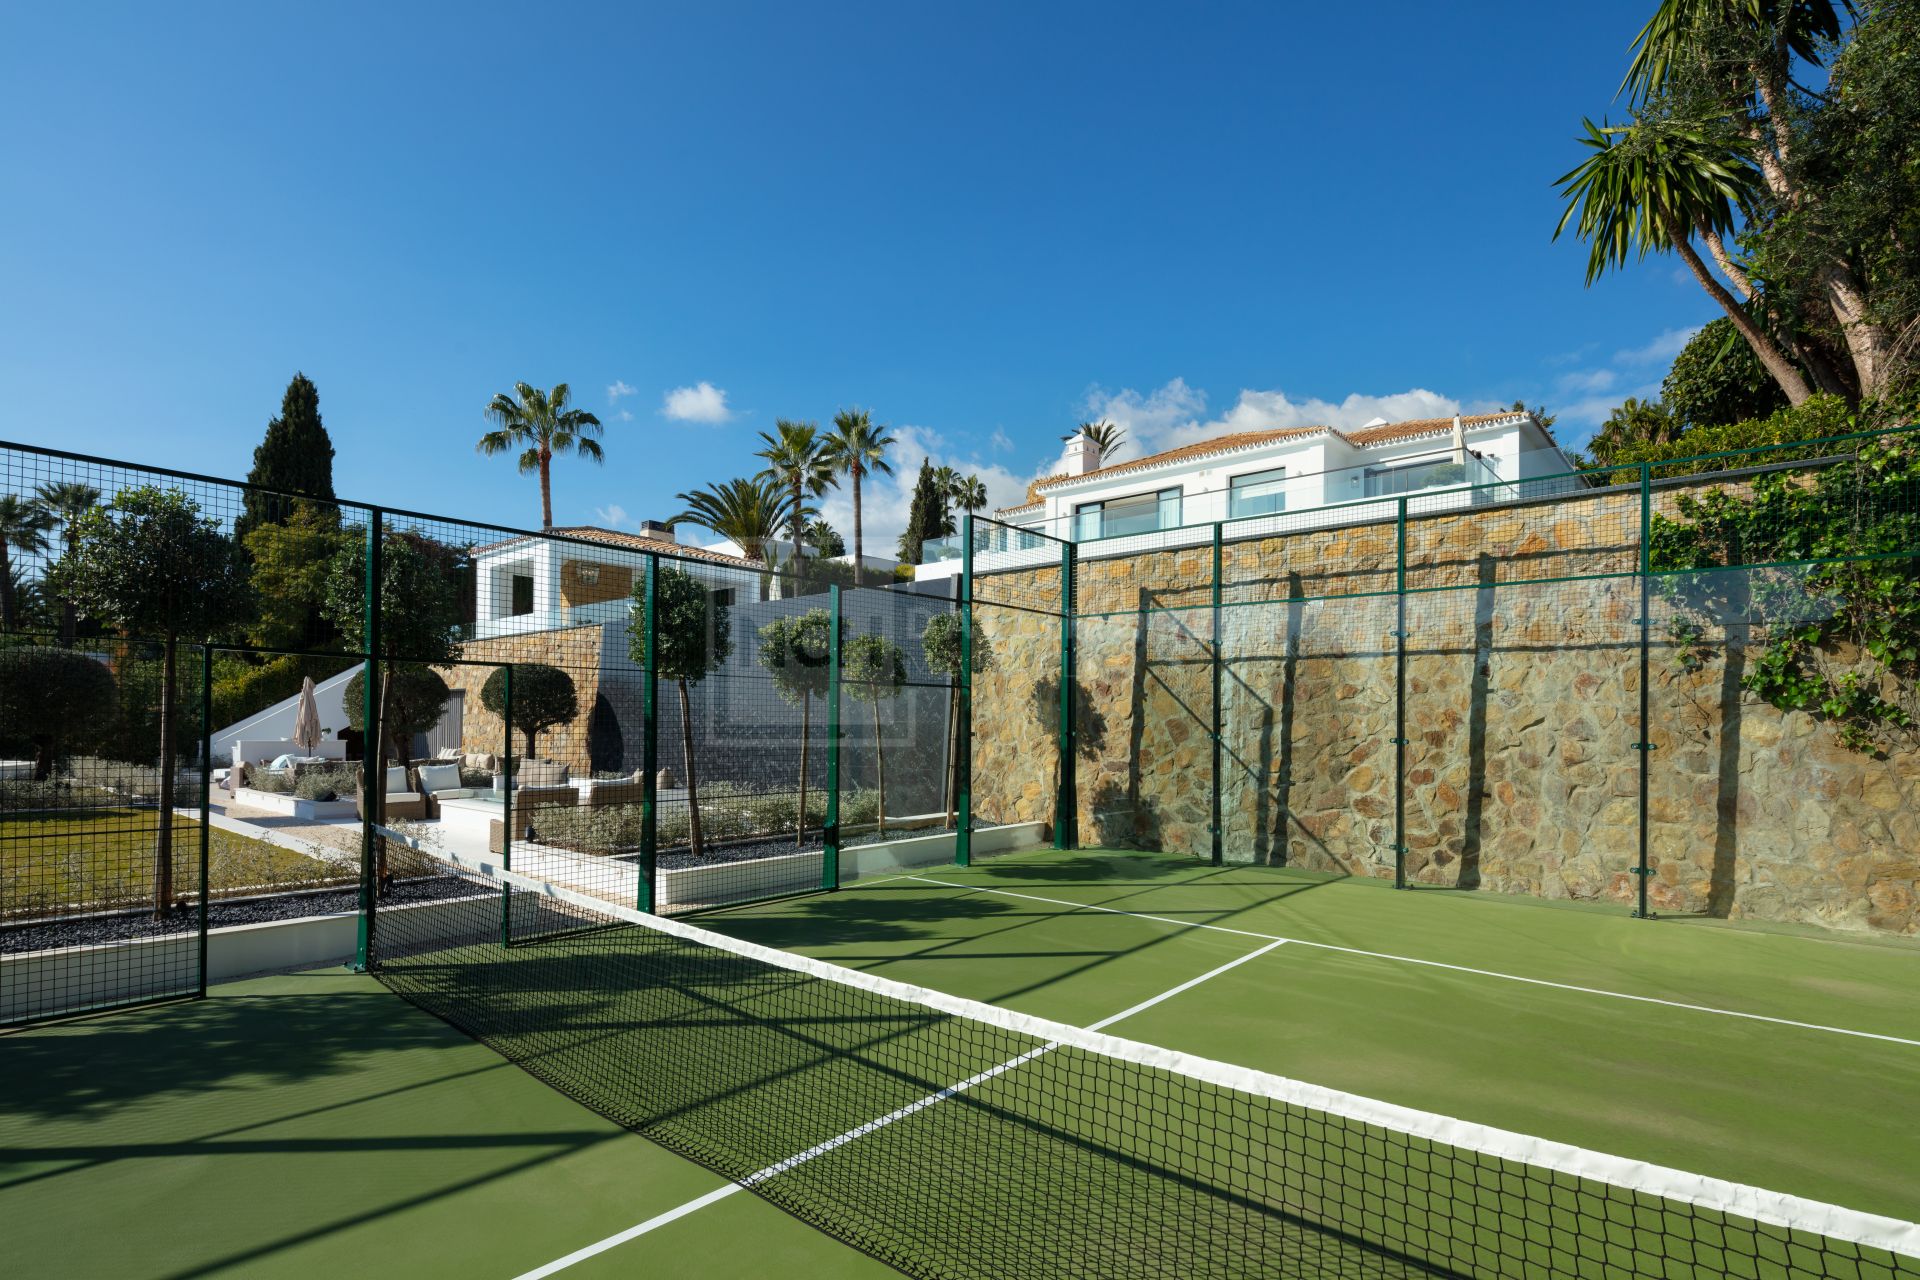 VILLA WITH PRIVATE TENNIS COURT LOCATED IN GATED COMMUNITY